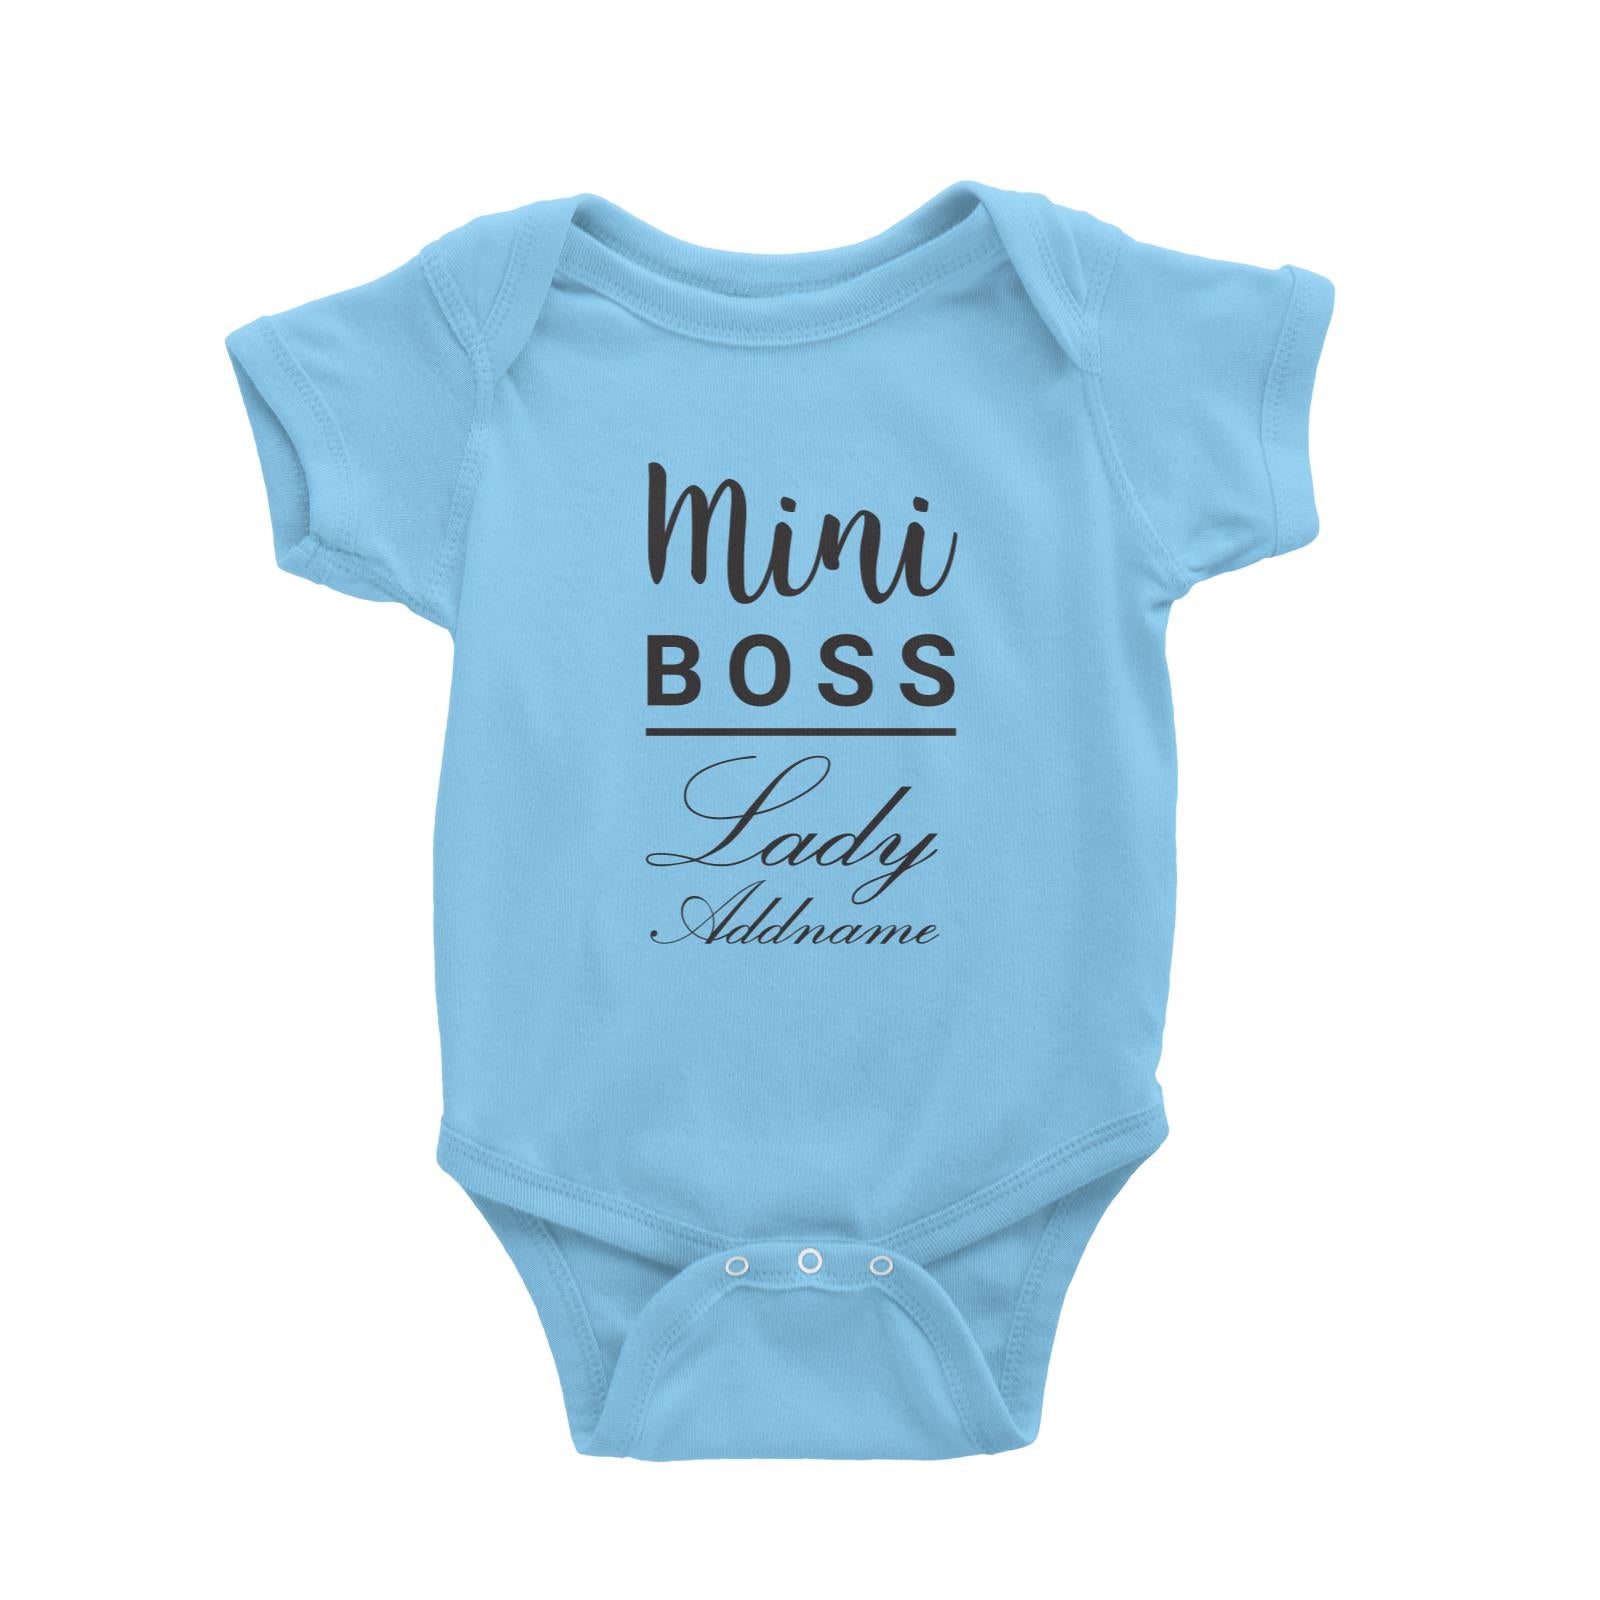 Mini Boss Lady Addname Baby Romper  Matching Family Personalizable Designs